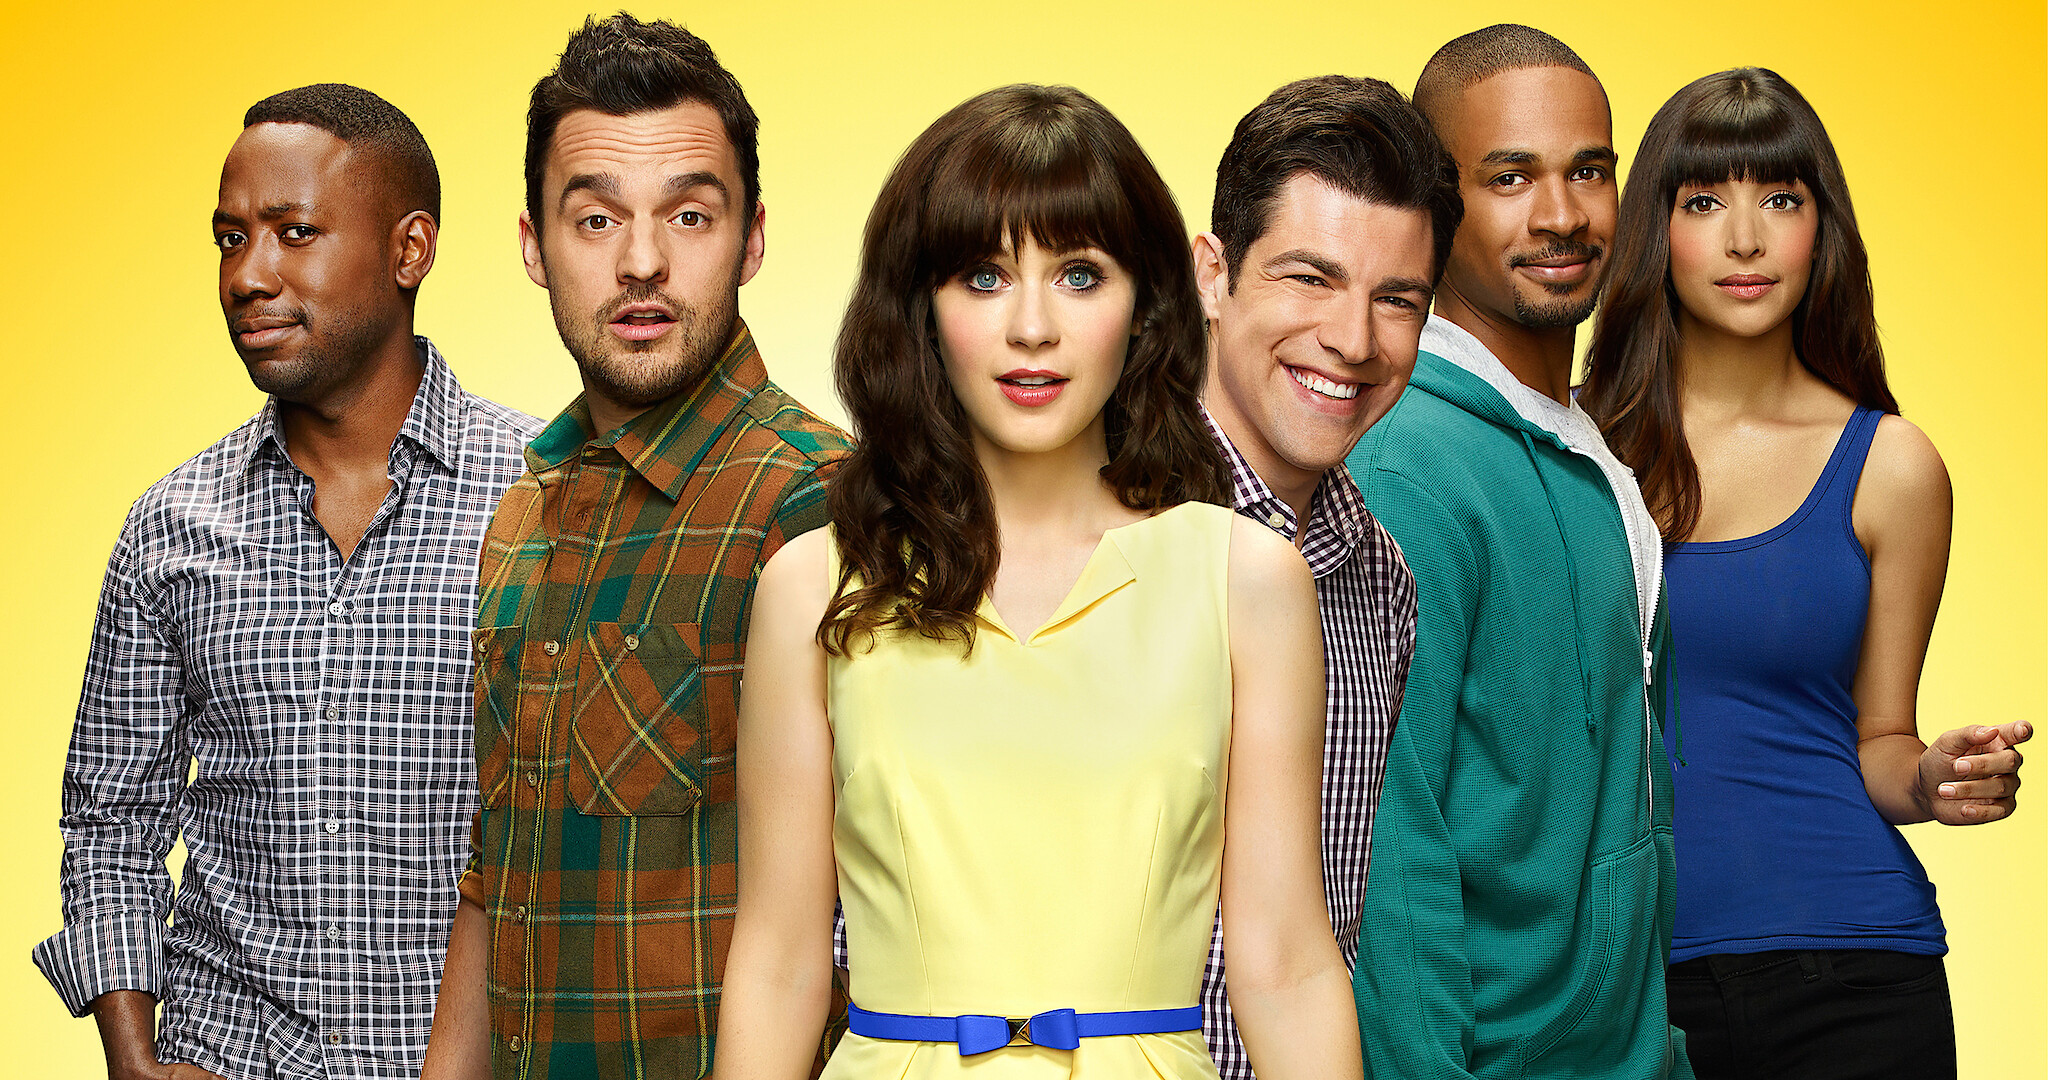 Best New Girl Episodes Thatll Make You Wish You Lived in the Loft